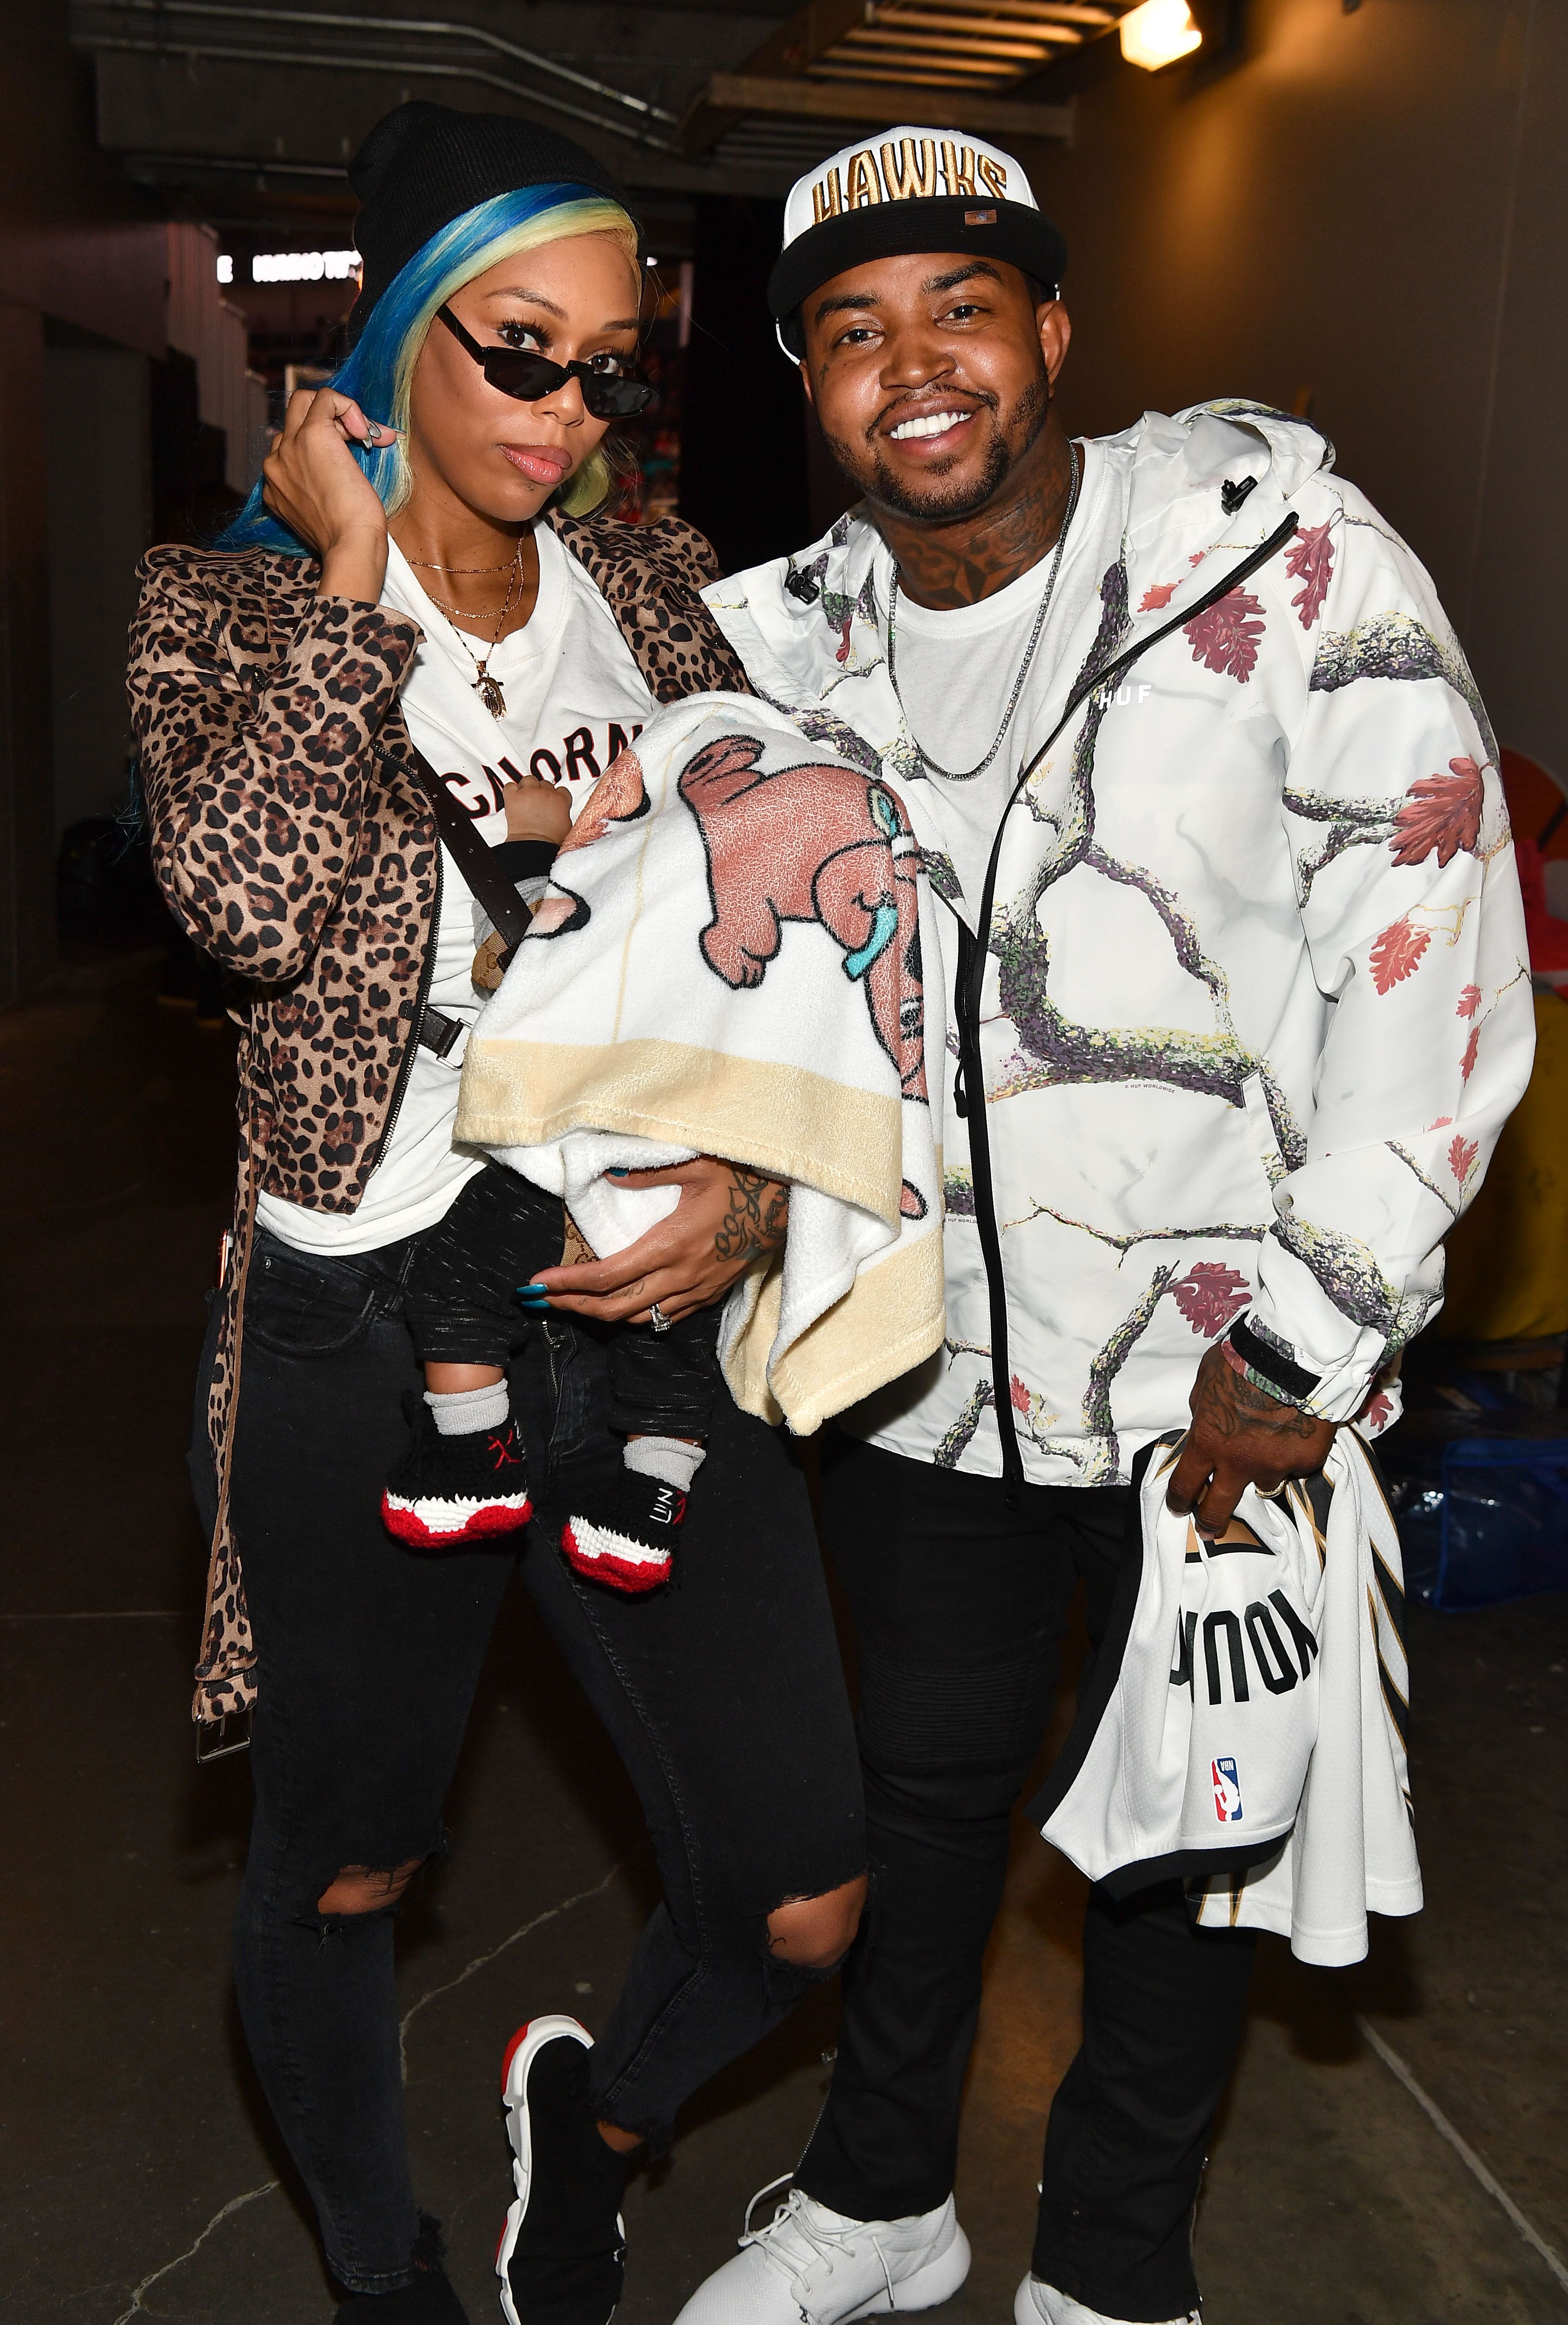 Bambi Benson and Lil Scrappy during the Detroit Pistons vs Atlanta Hawks Game at State Farm Arena on November 9, 2018 in Atlanta, Georgia. | Source: Getty Images